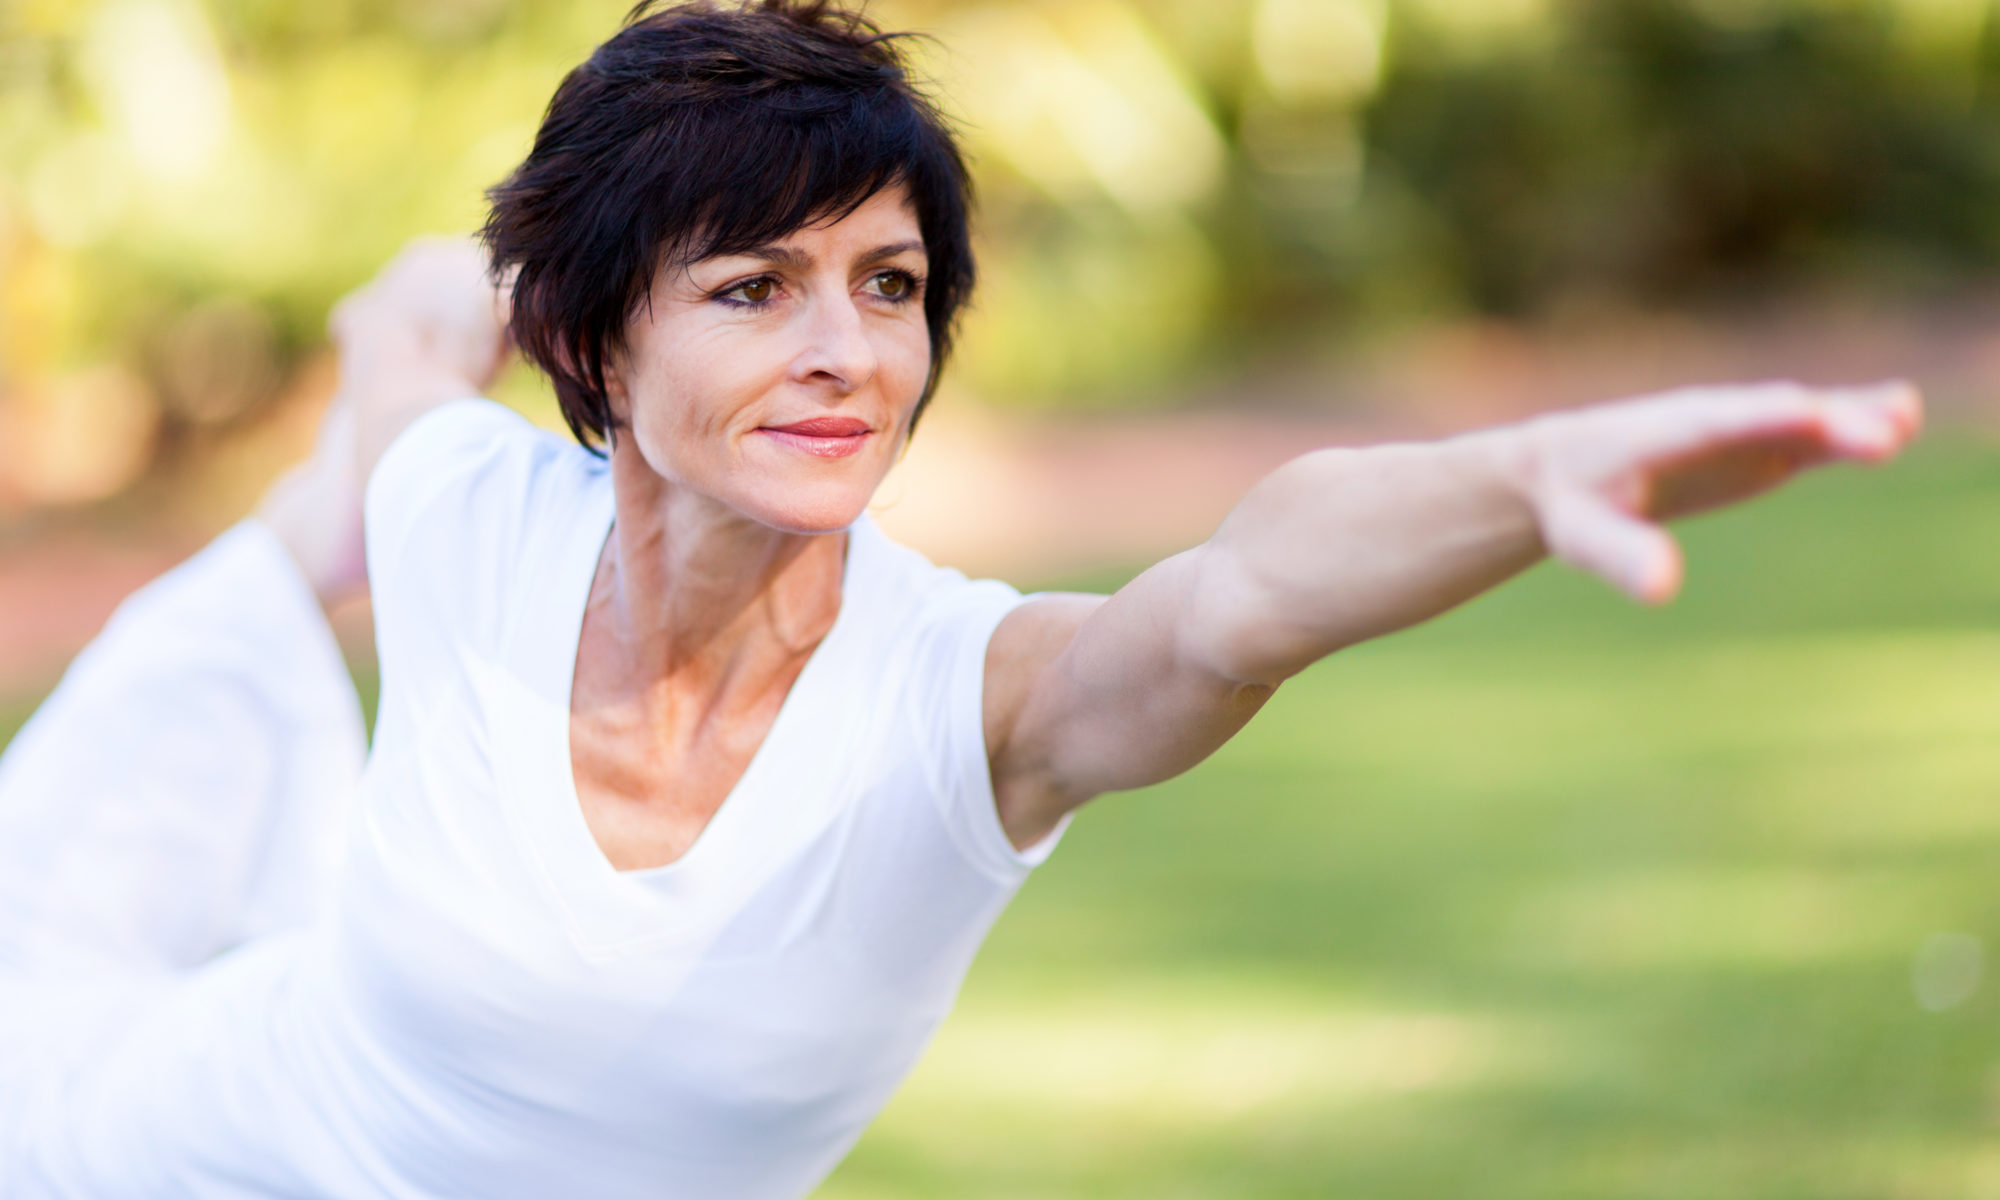 healthy middle aged woman stretching outdoors